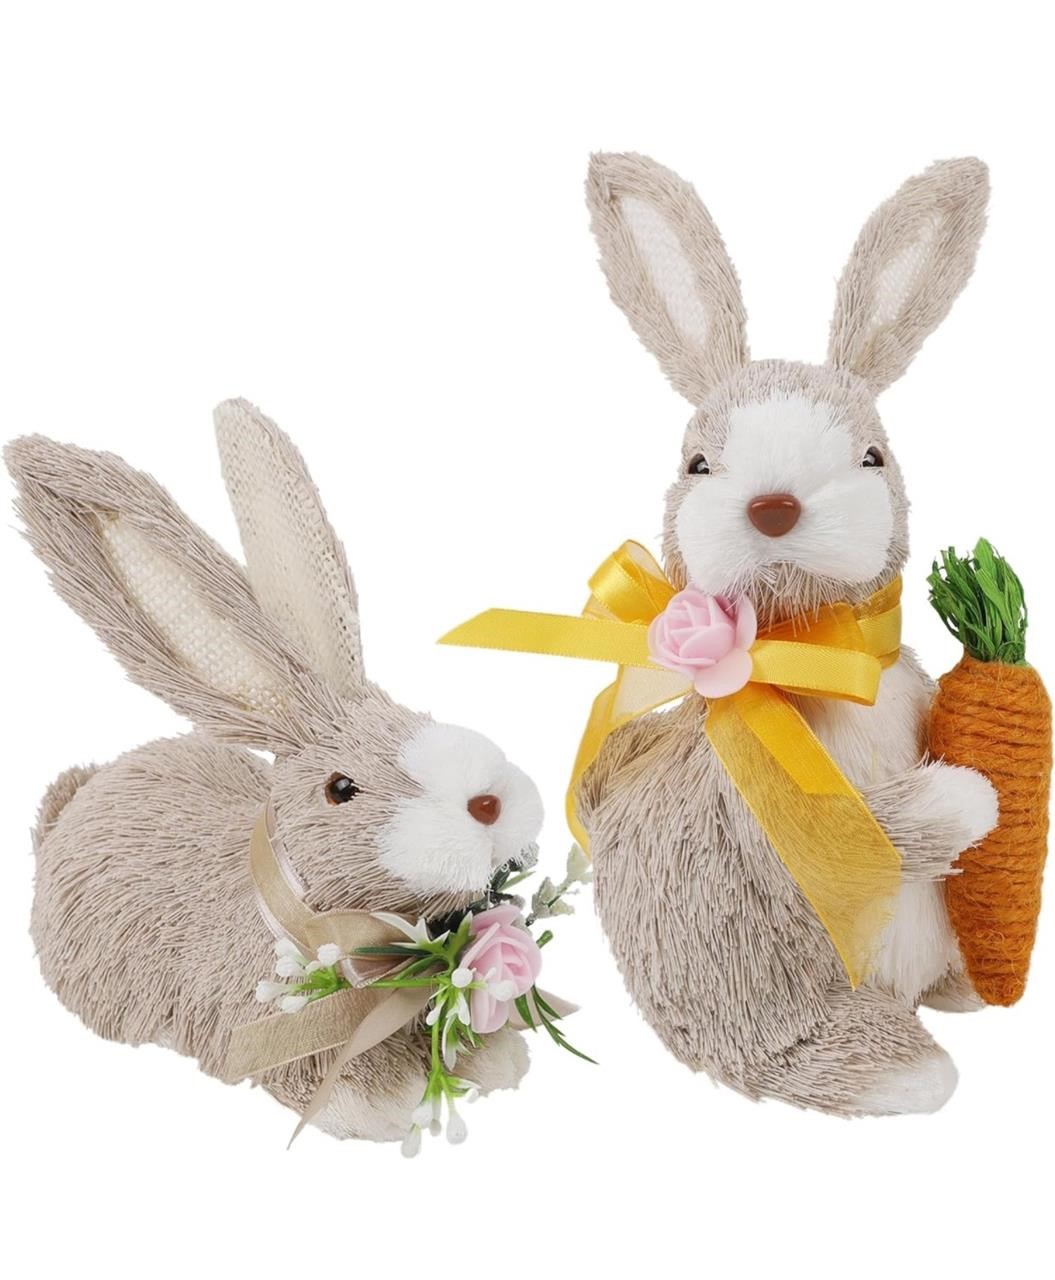 DR.DUDU Set of 2 Easter Bunny Decorations, Straw